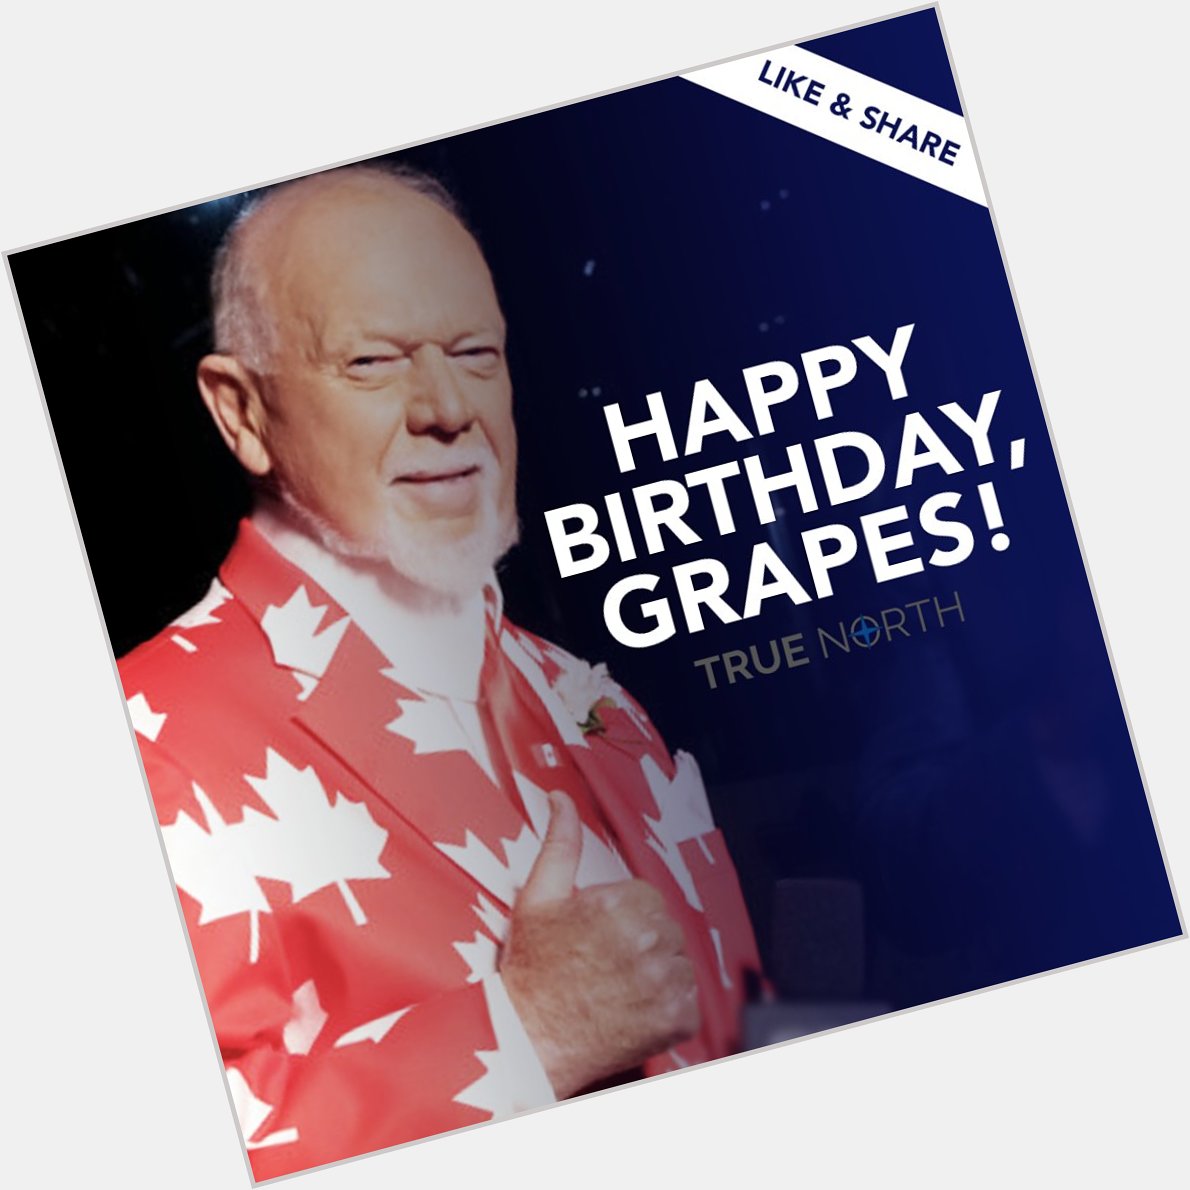 From You people should wish Don Cherry a Happy Birthday! 